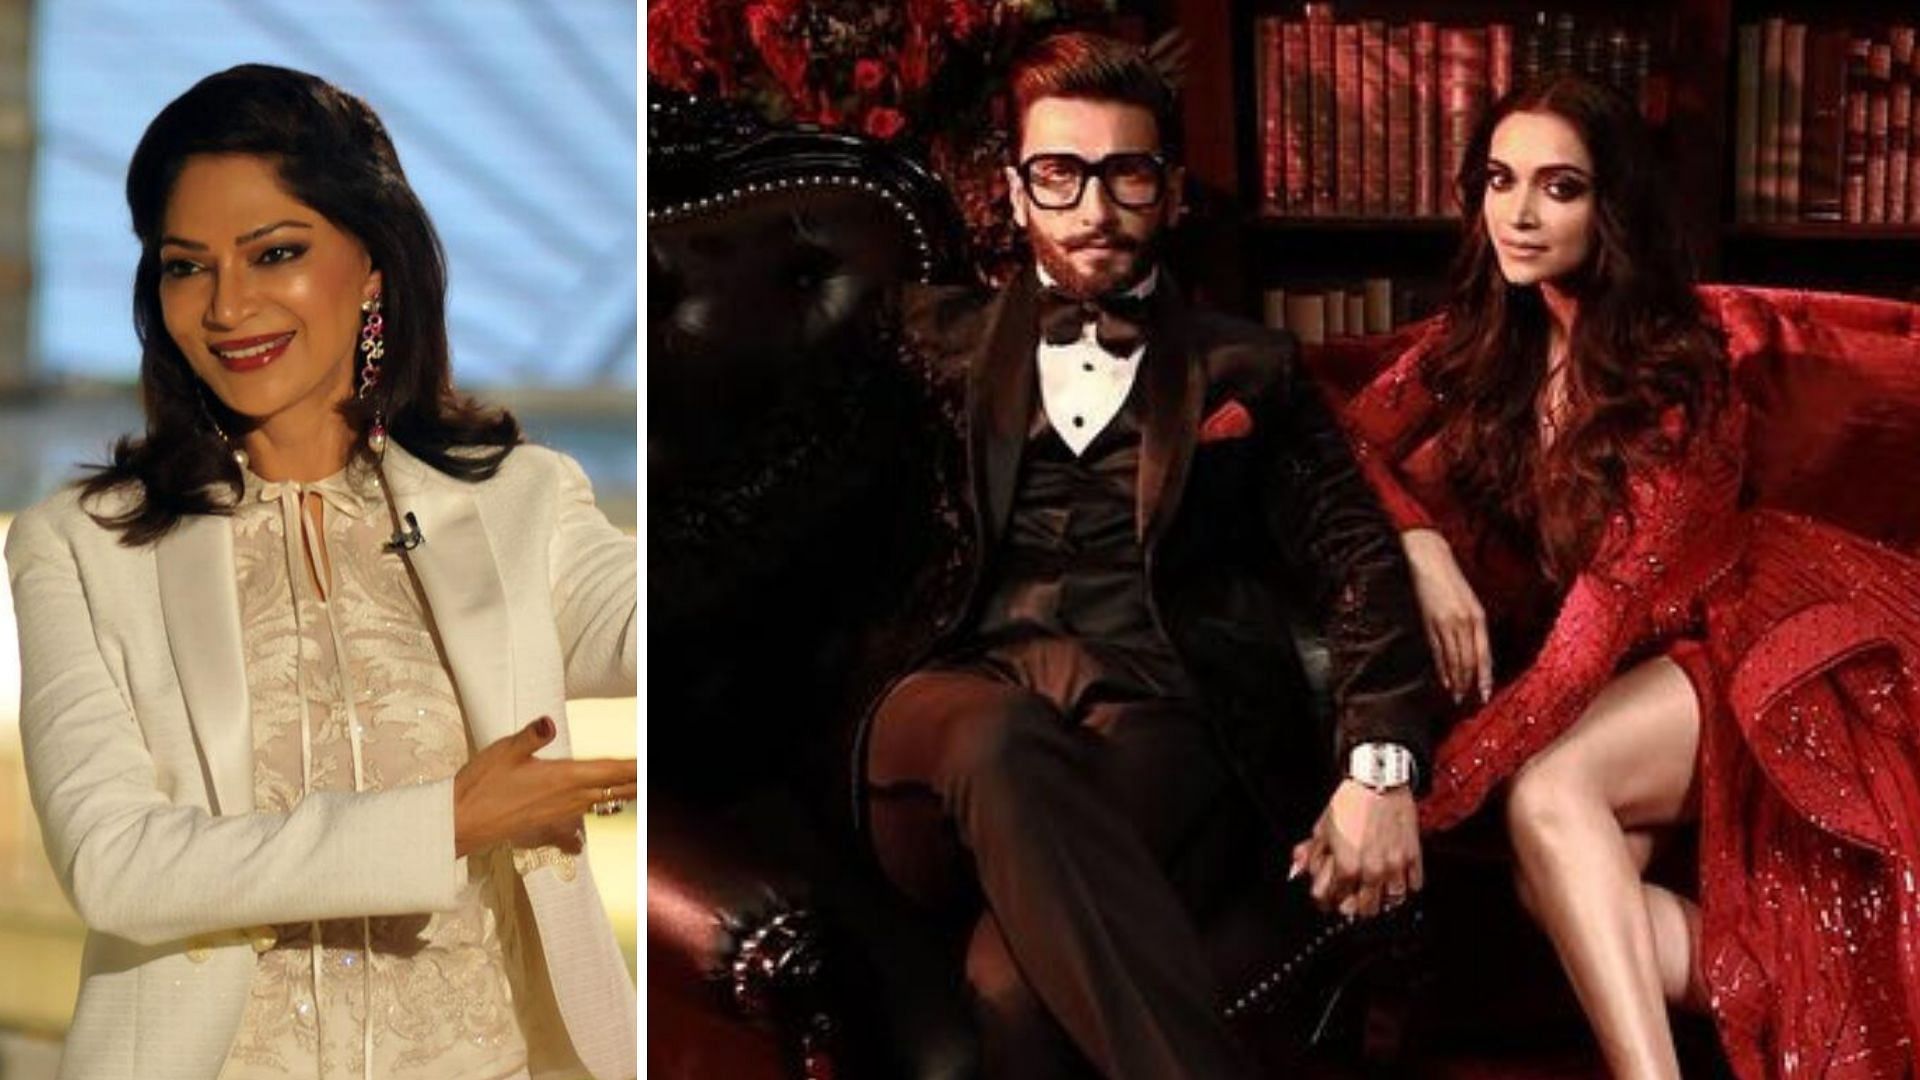 Simi Garewal is set to host a new season of <i>Rendezvous with Simi Garewal </i>with Ranveer and Deepika as her first guests.